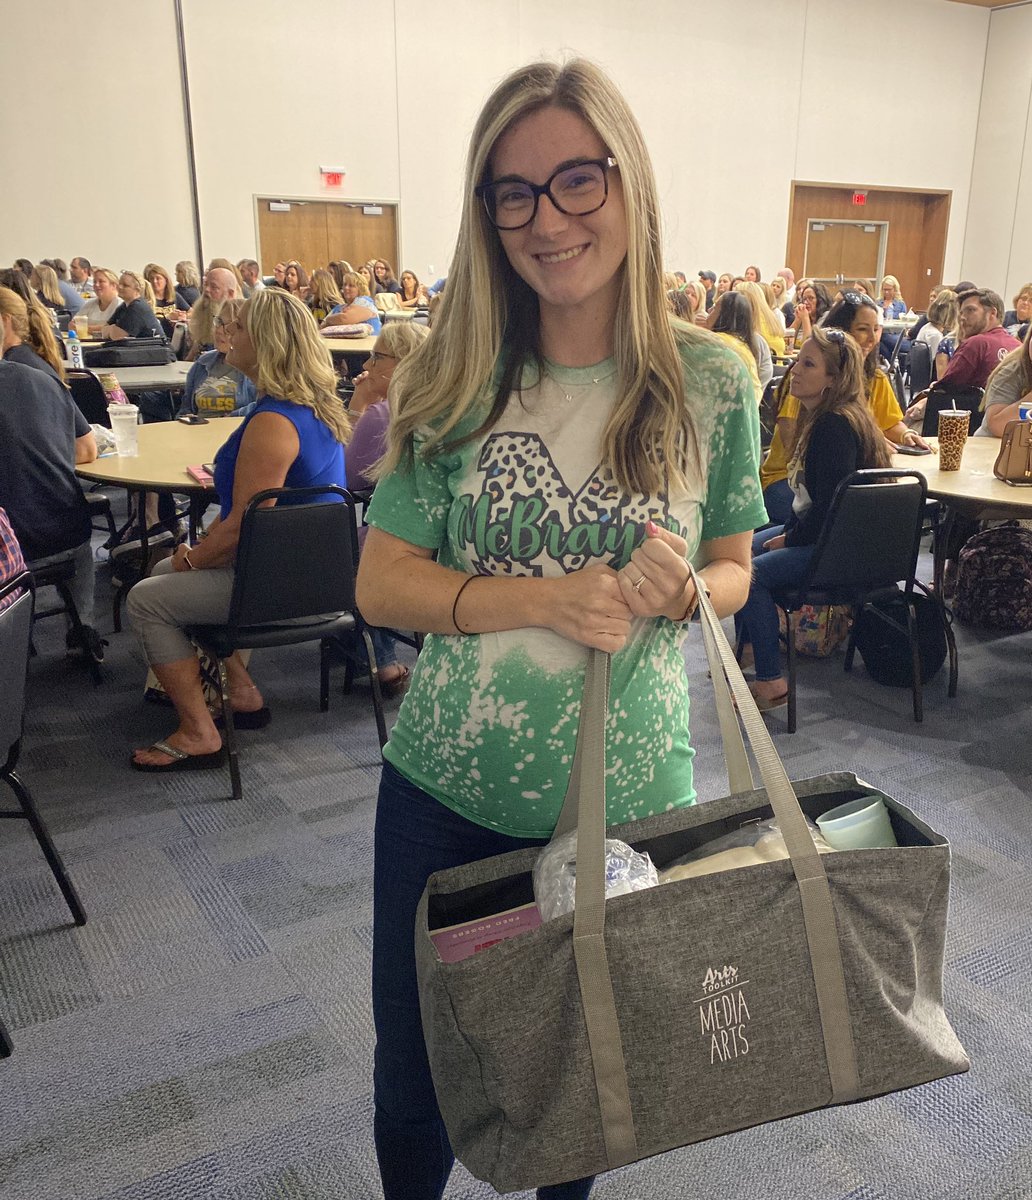 Congratulations to Andrea Kennedy, winner of the KET swag bag, and to all the participants of the fabulous TeachMeet at MSU! #TMKY22